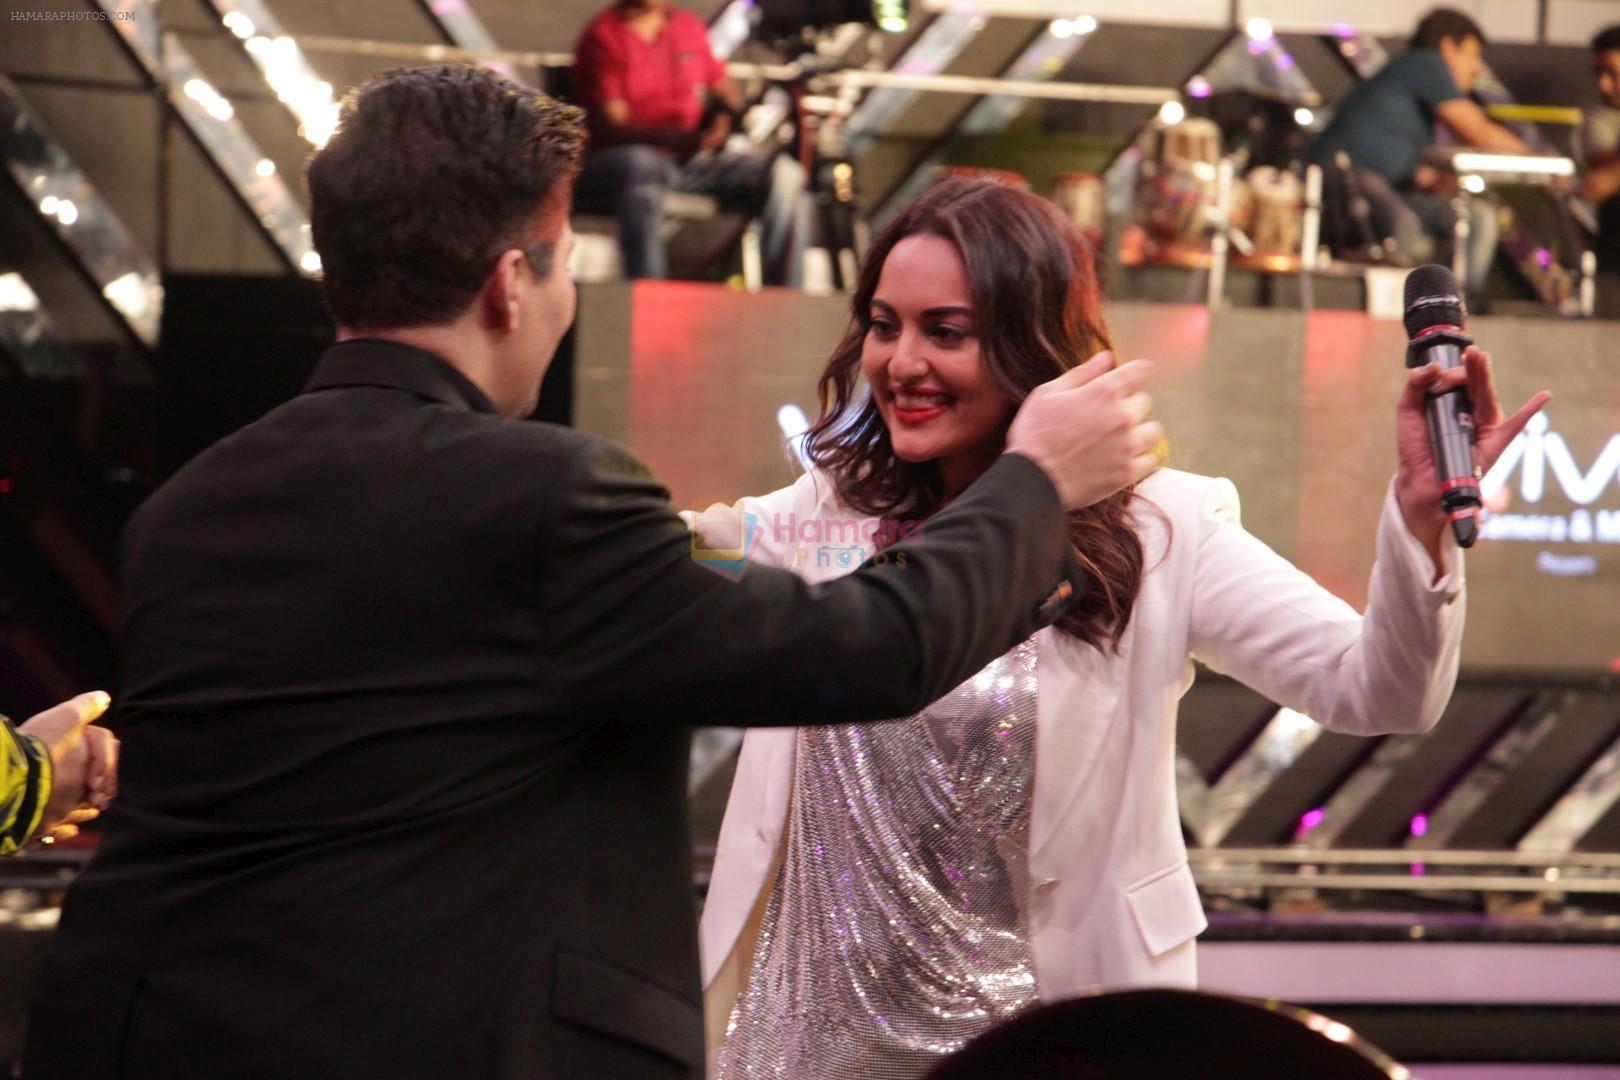 Sonakshi Sinha To Promote Noor & Nach Baliye On The Set Of Dil Hai Hindustani on 31st March 2017